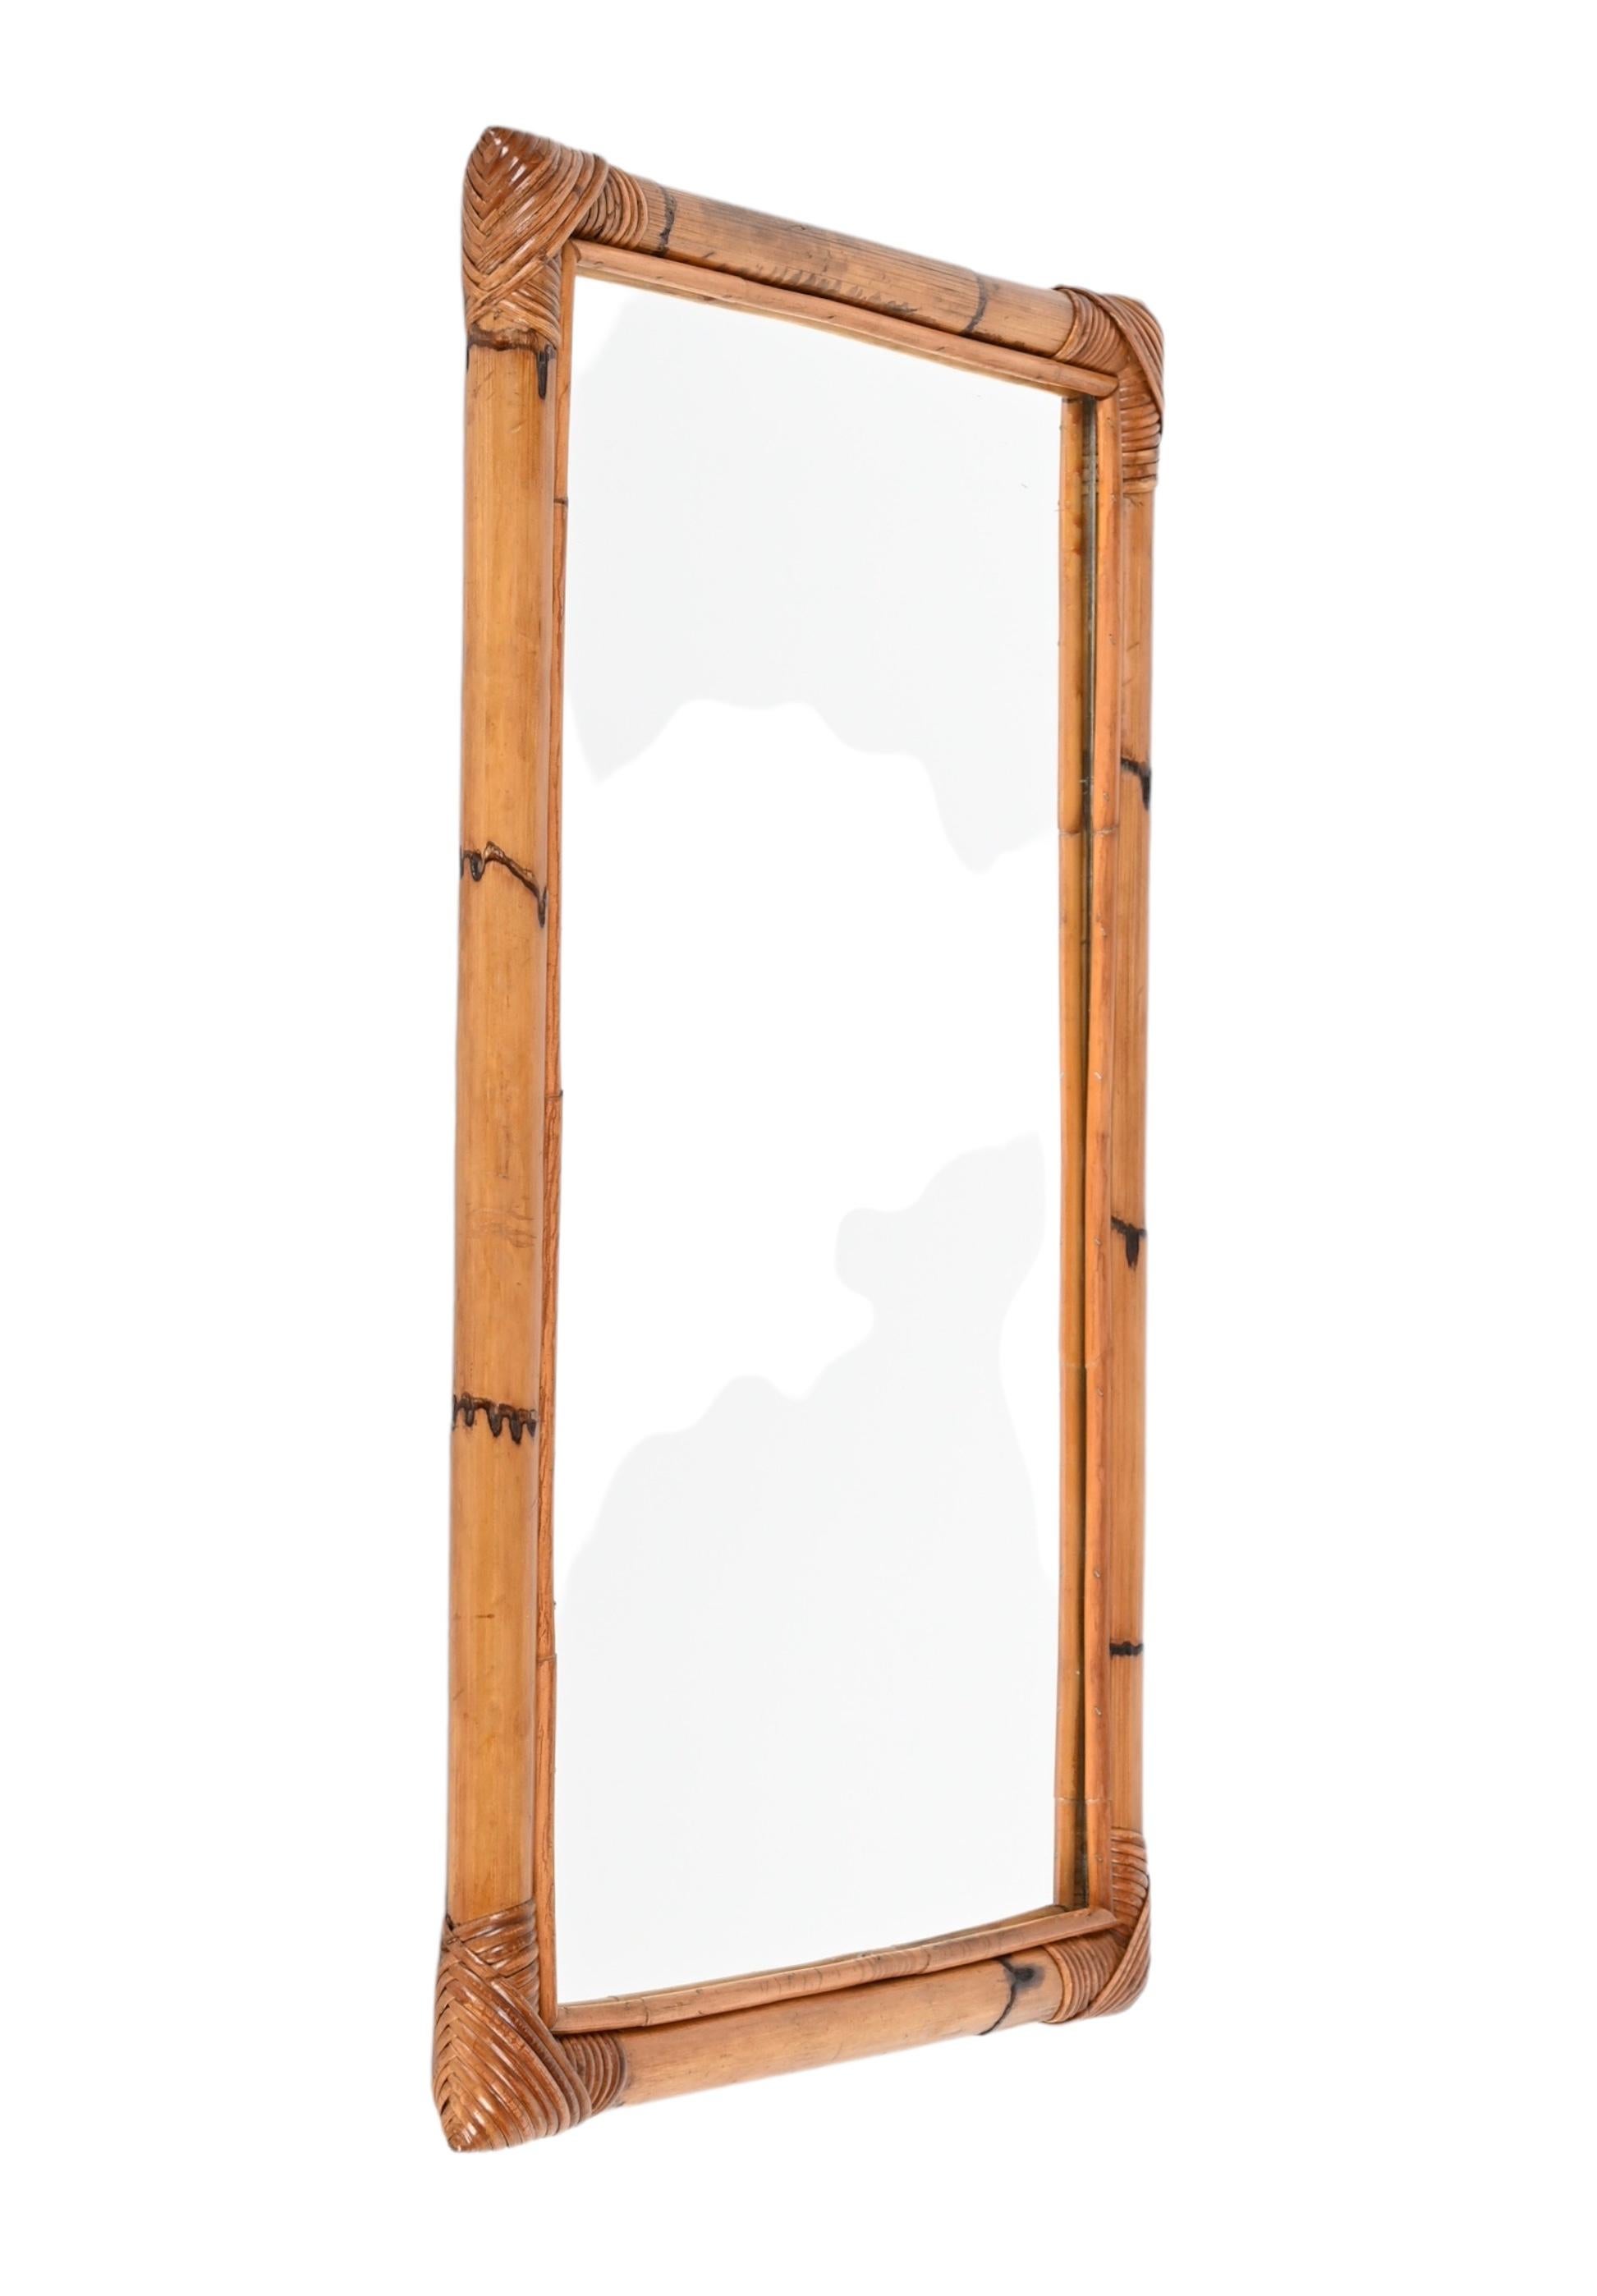 Midcentury Rectangular Italian Mirror with Double Bamboo Cane Frame, 1970s For Sale 3